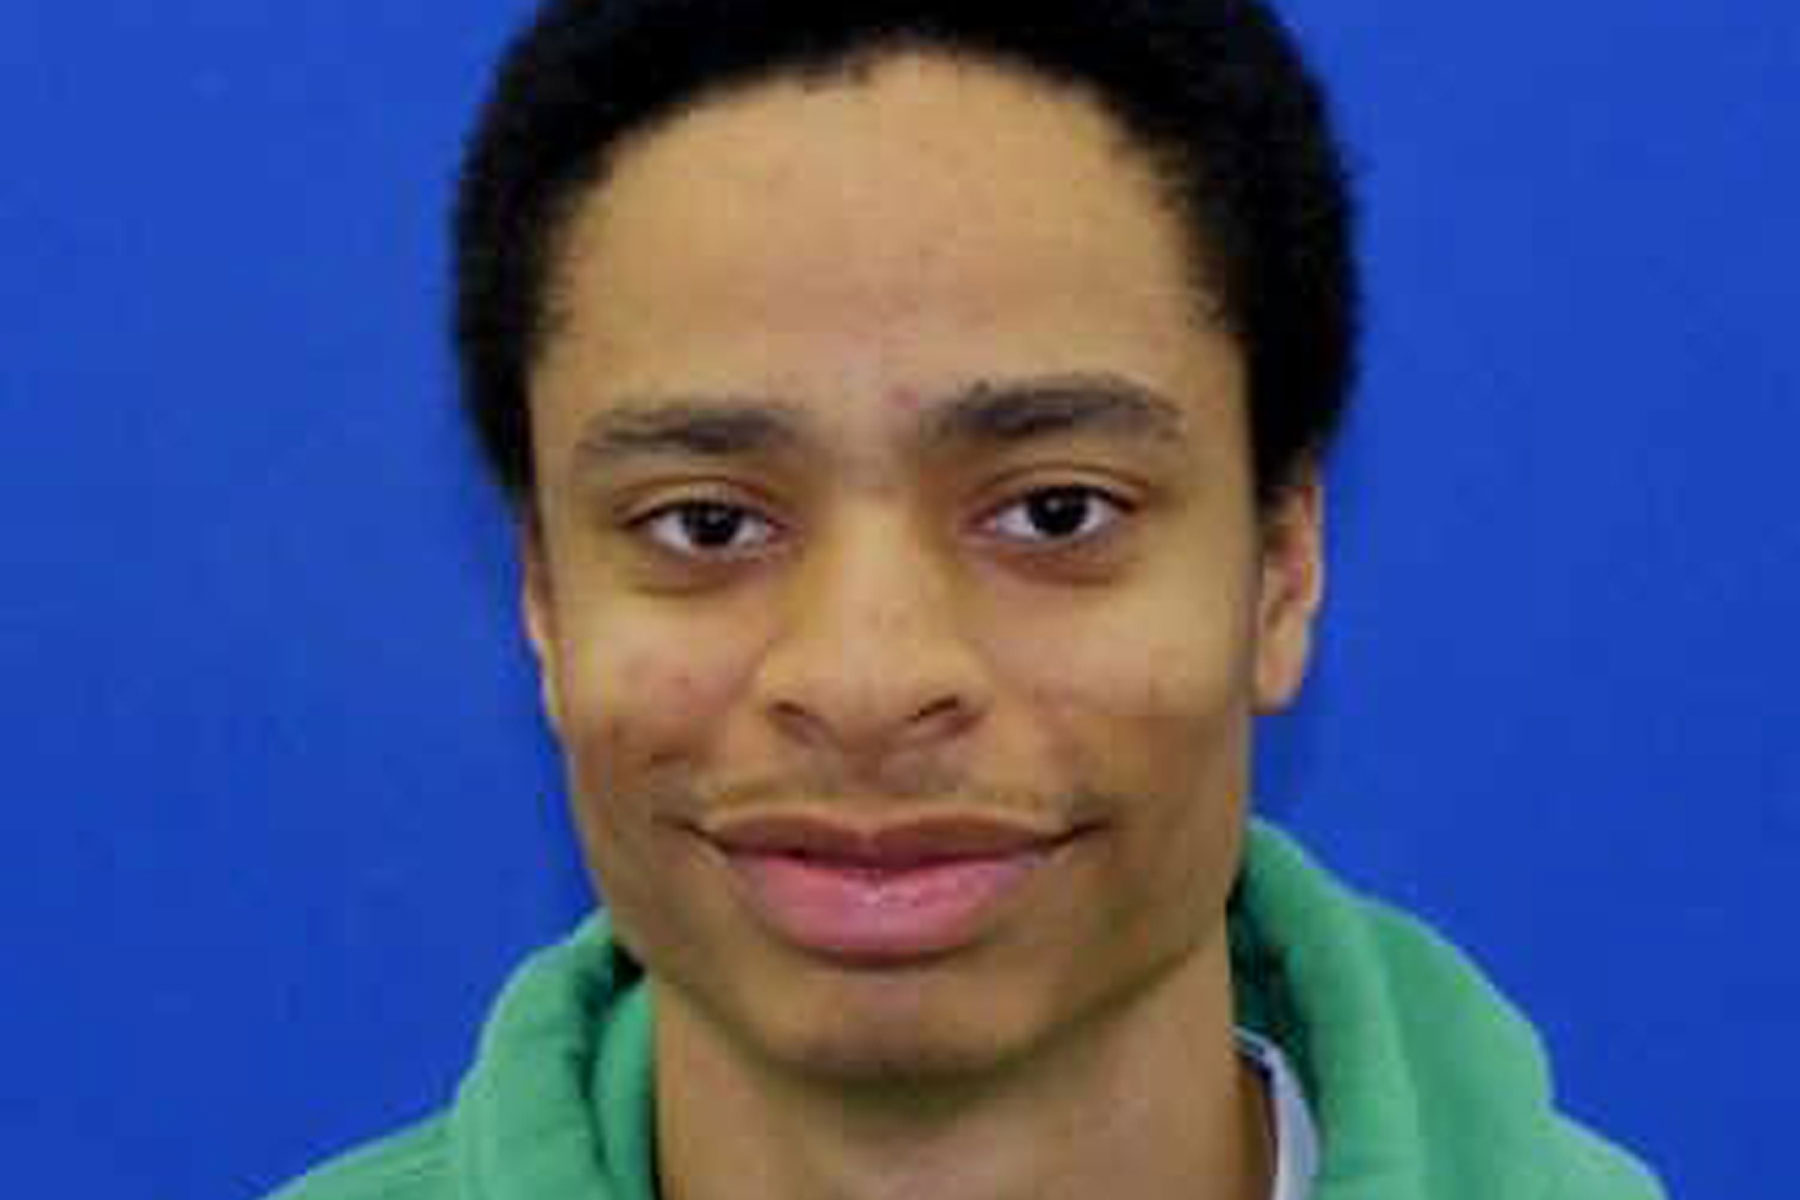 This photo released by the Howard County Police shows shooting suspect Darion Marcus Aguilar, 19, of College Park, MD. (Howard County Police—AP)